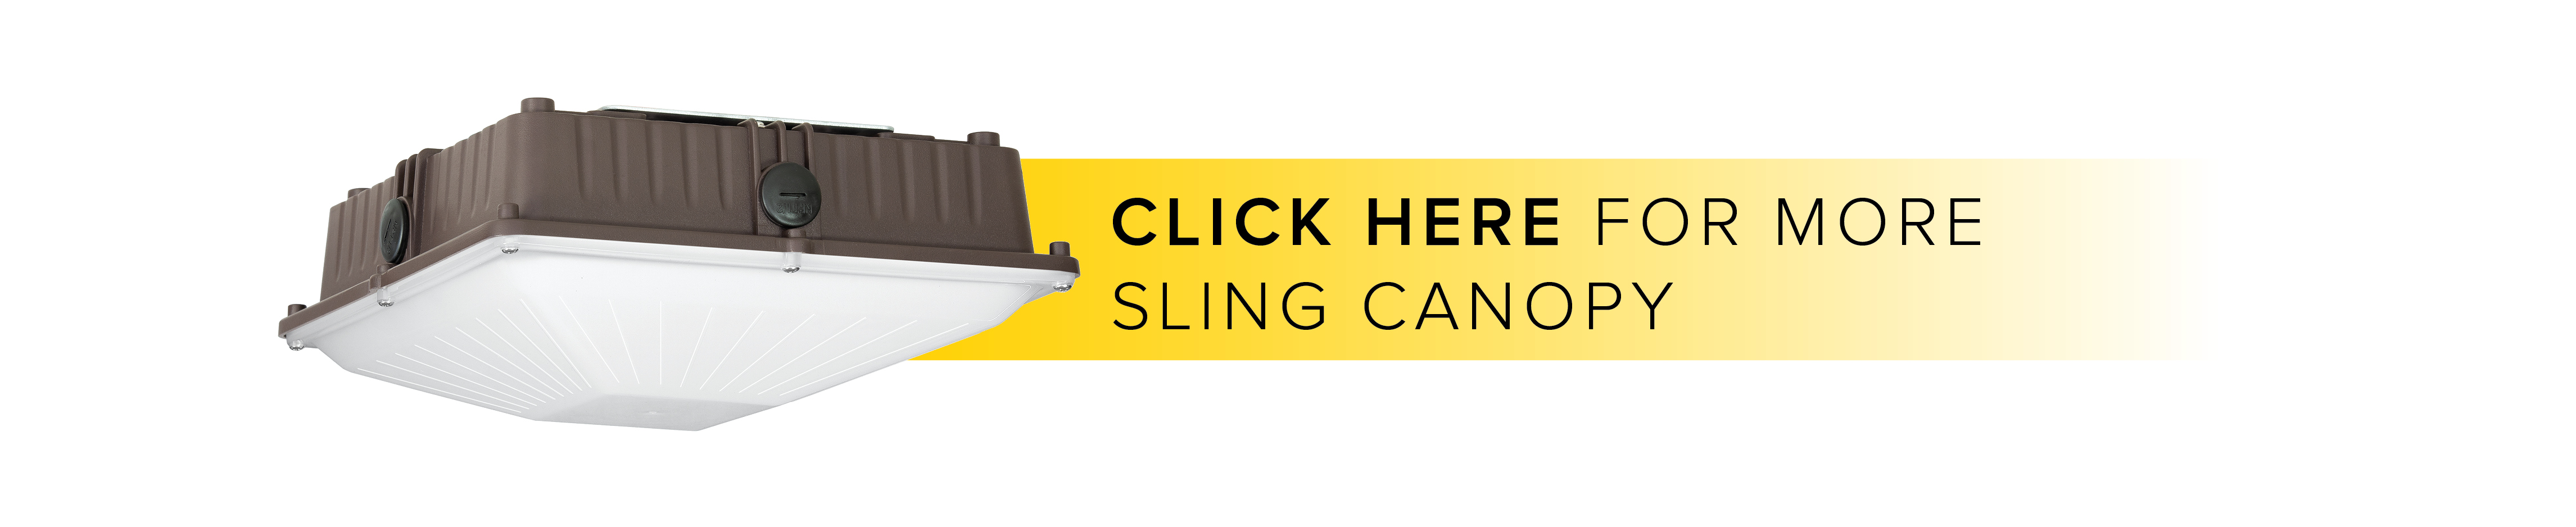 Click here for more Sling Canopy